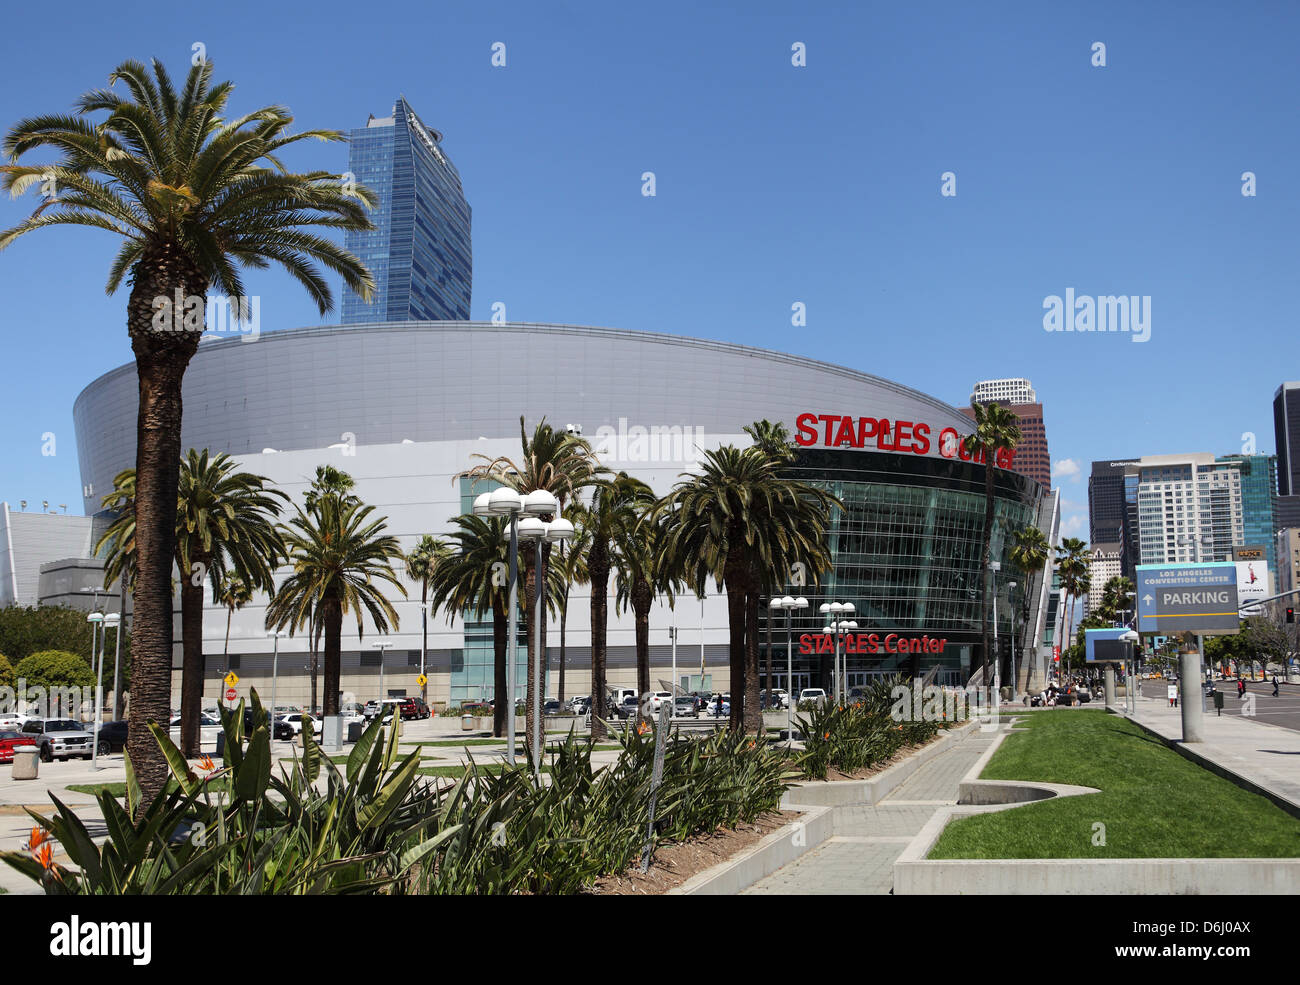 LOS ANGELES, CALIFORNIA, USA - April 16, 2013 - The Staples Center in Downtown Los Angeles on April 16, 2013 Stock Photo